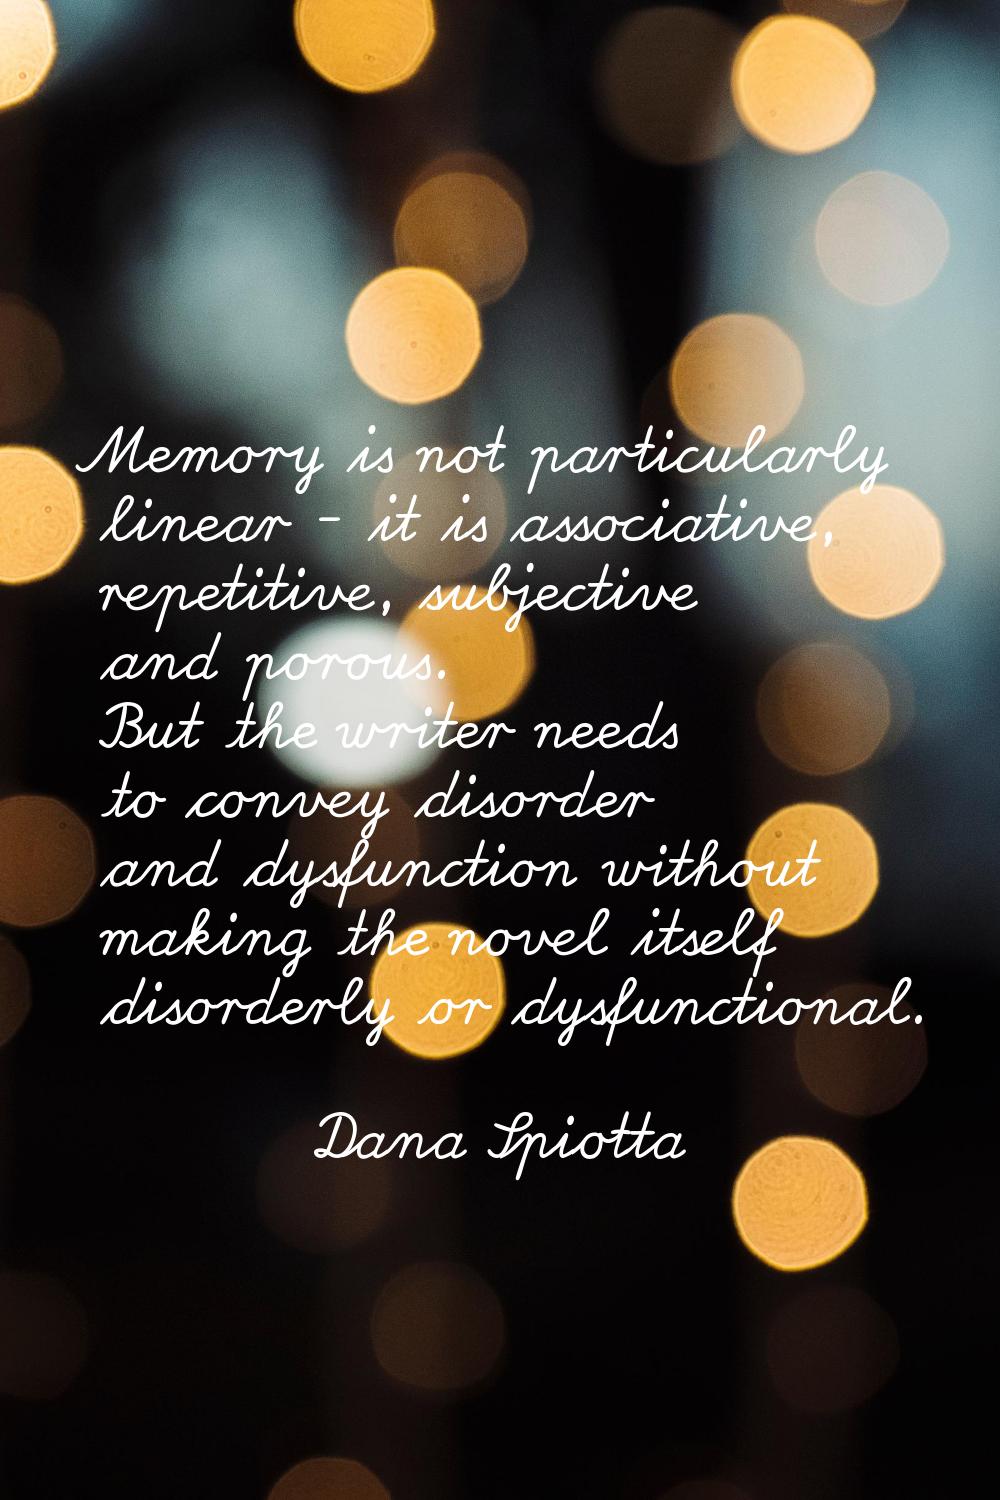 Memory is not particularly linear - it is associative, repetitive, subjective and porous. But the w